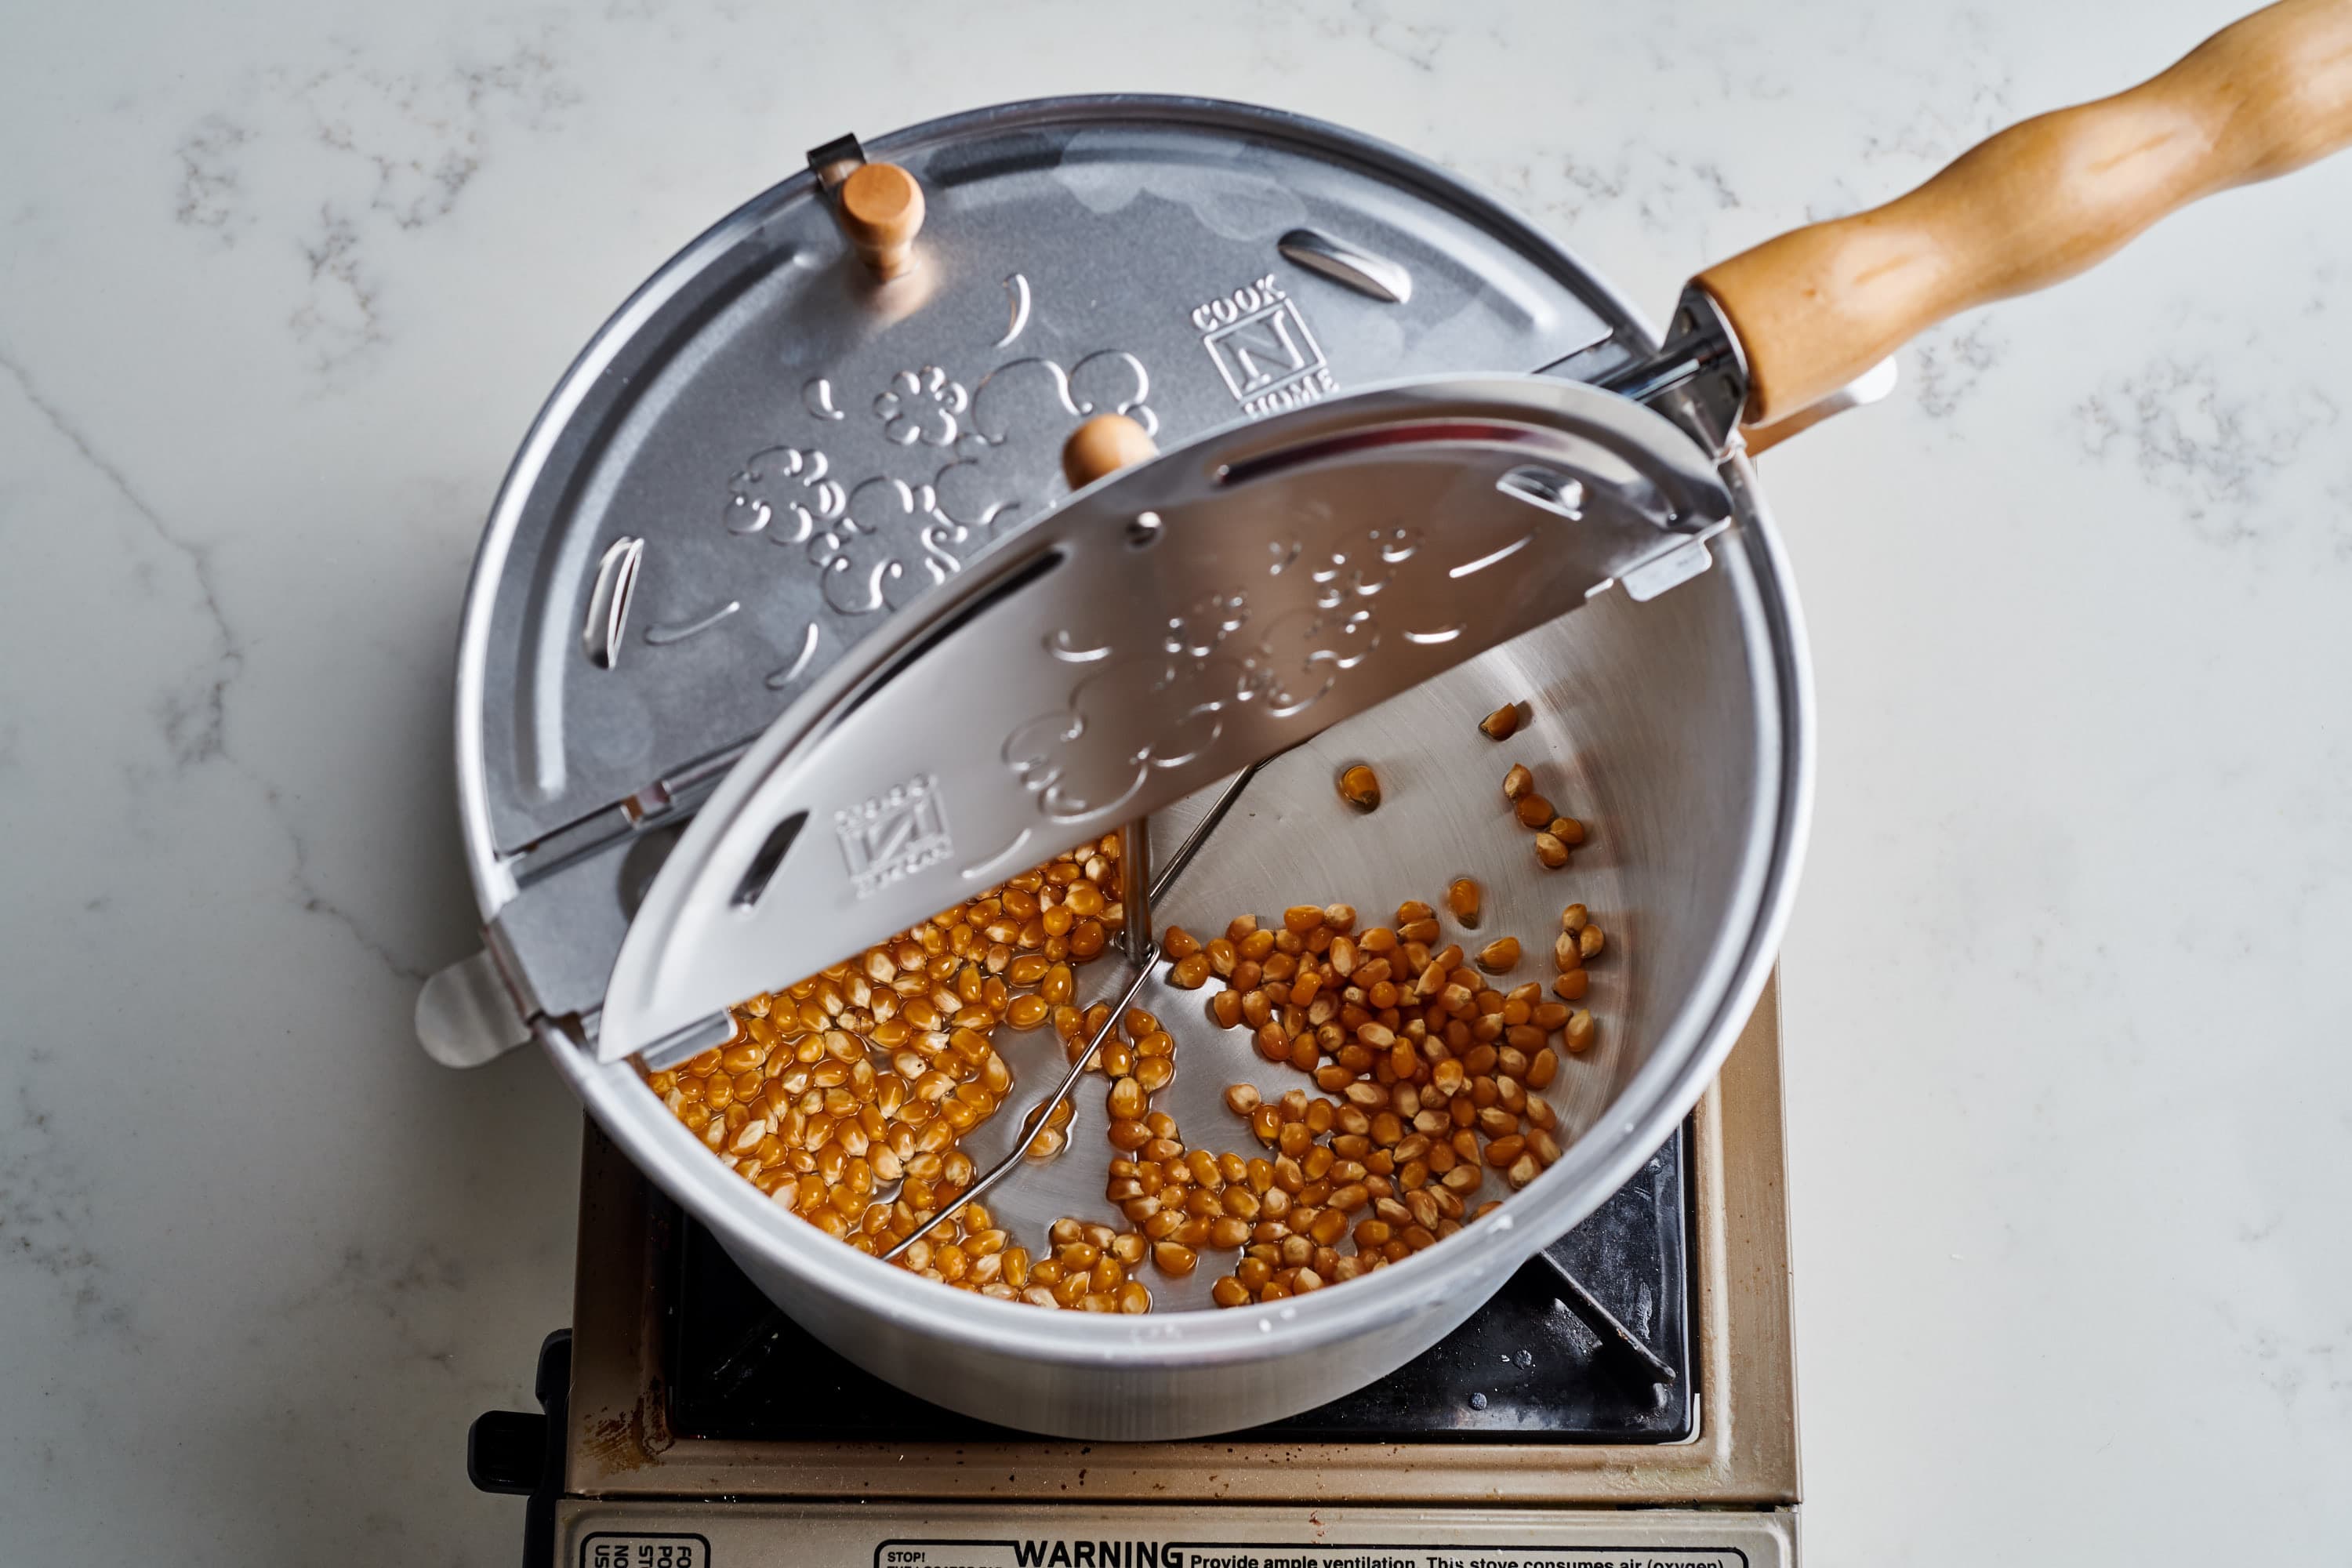 We Tried 8 Methods for Popping Popcorn at Home And Found The Very Best